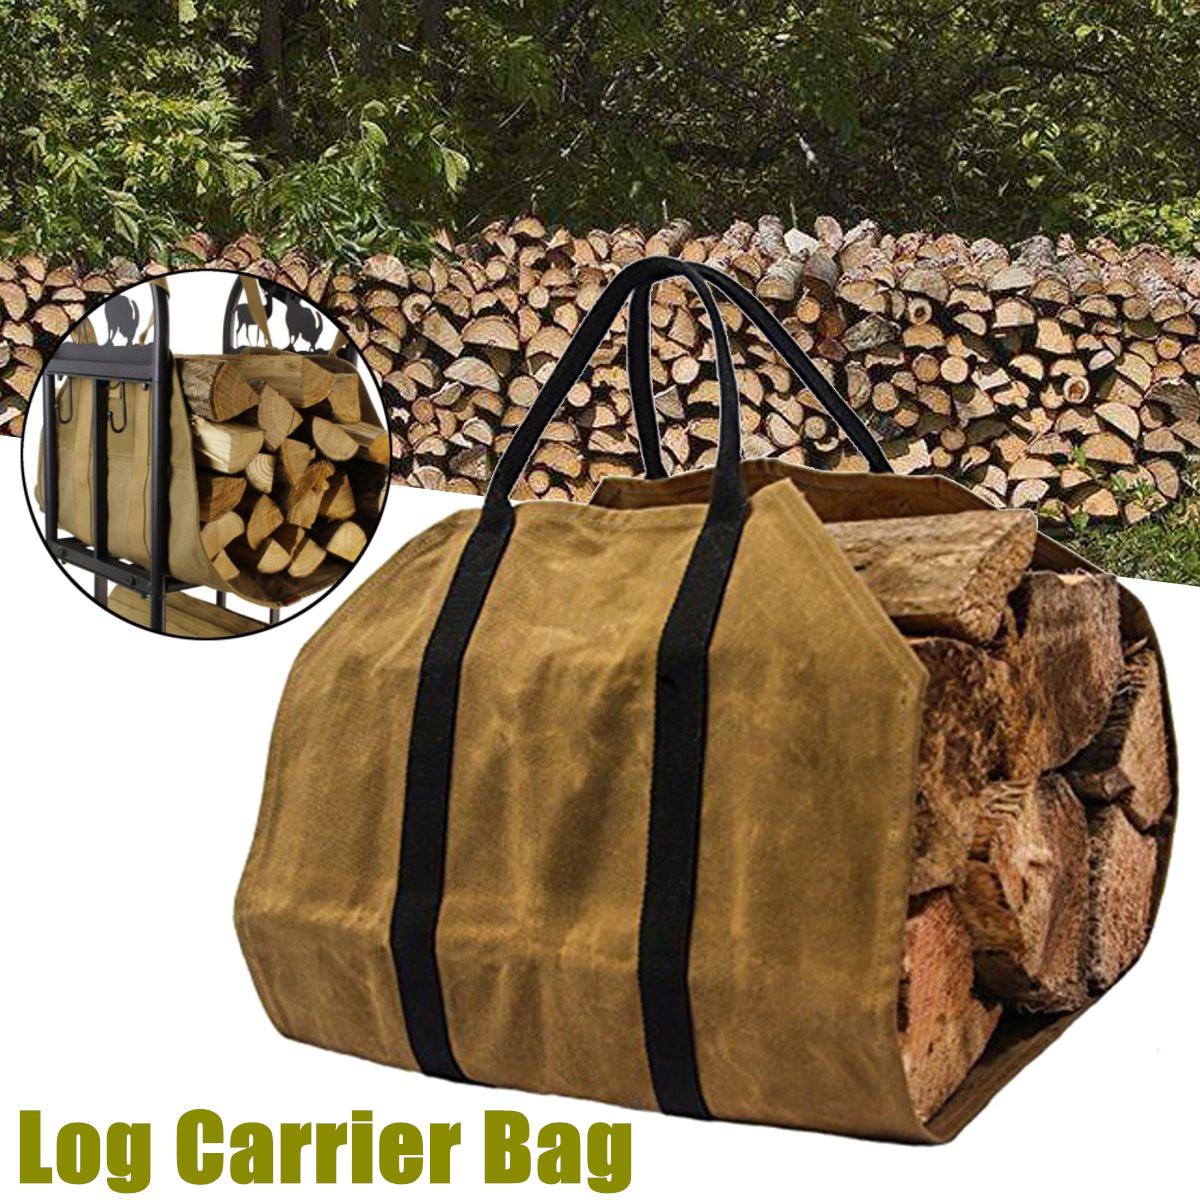 khaki-Firewood-Carrier-Log-Carrier-Wood-Carrying-Tool-Bag-for-Fireplace-Waxed-Canvas-1388831-1